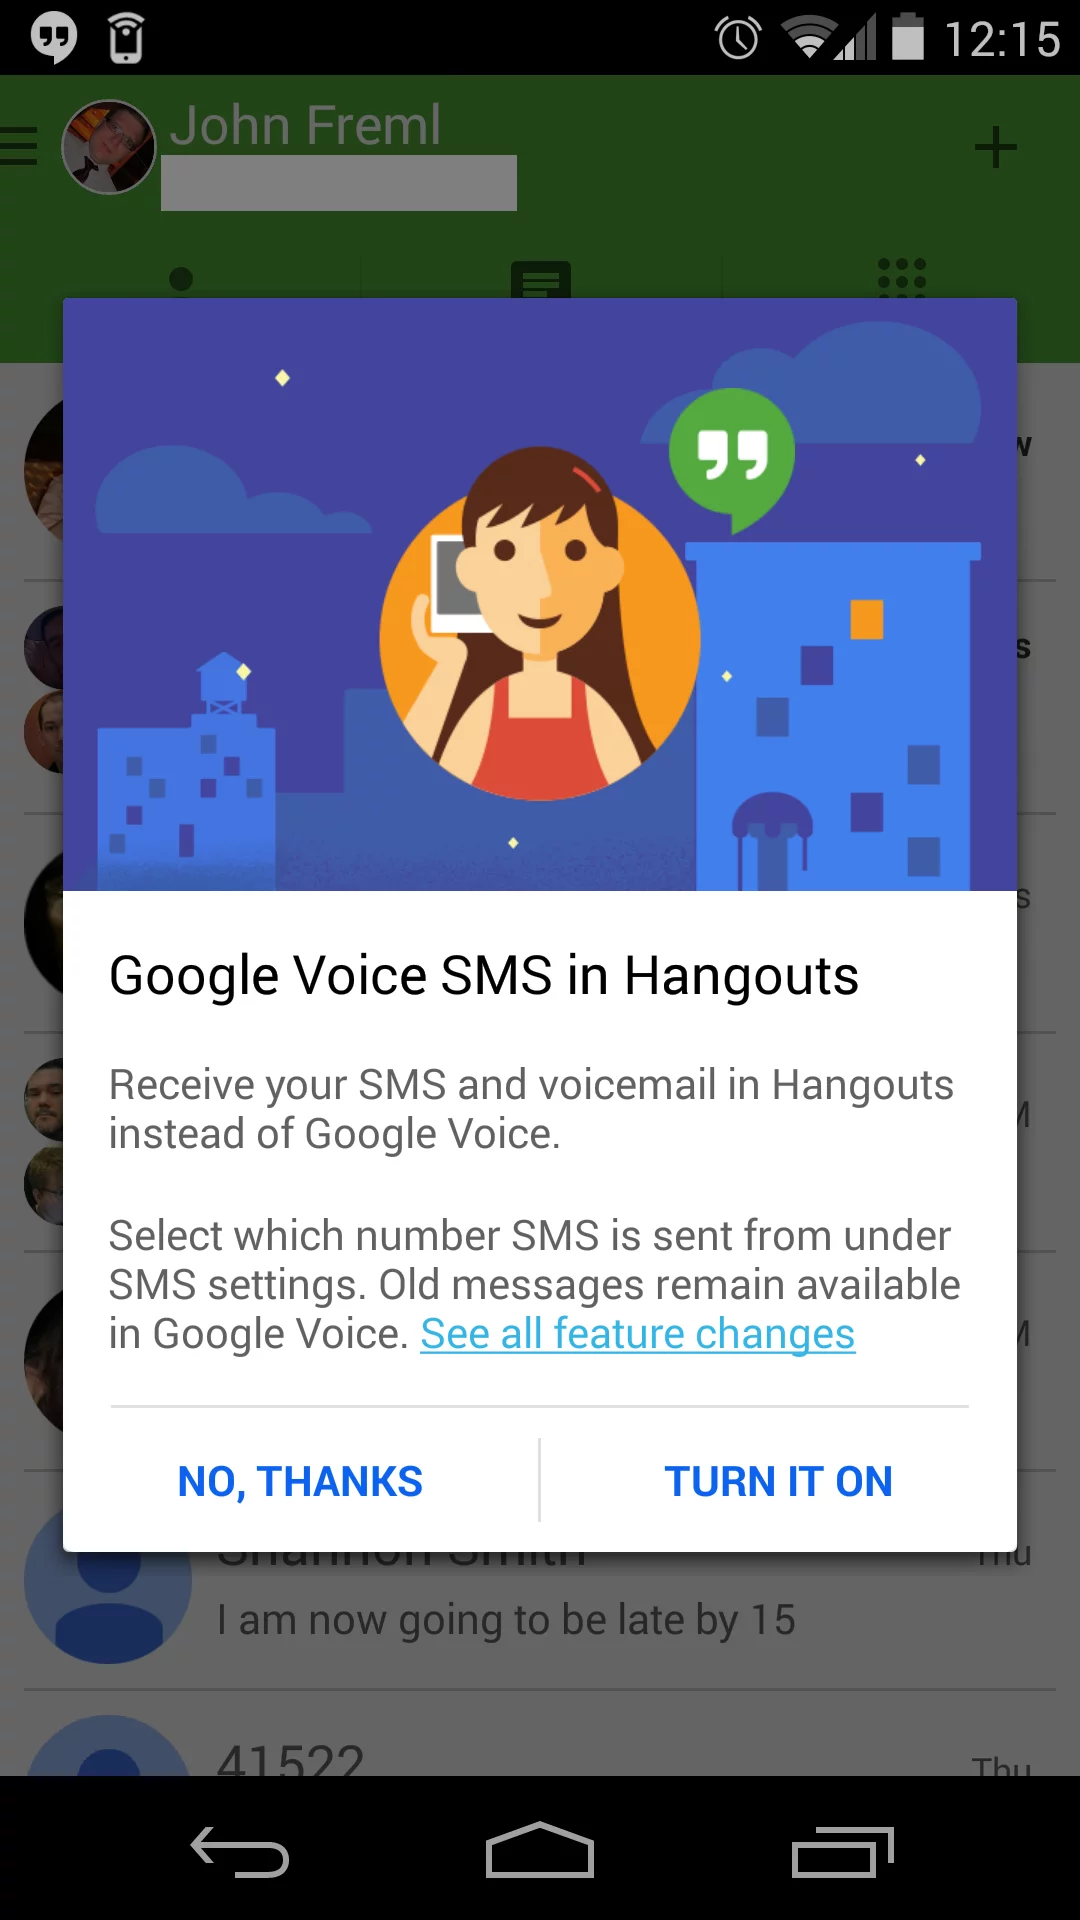 Hangouts integration - for some reason we don't have an alt tag here